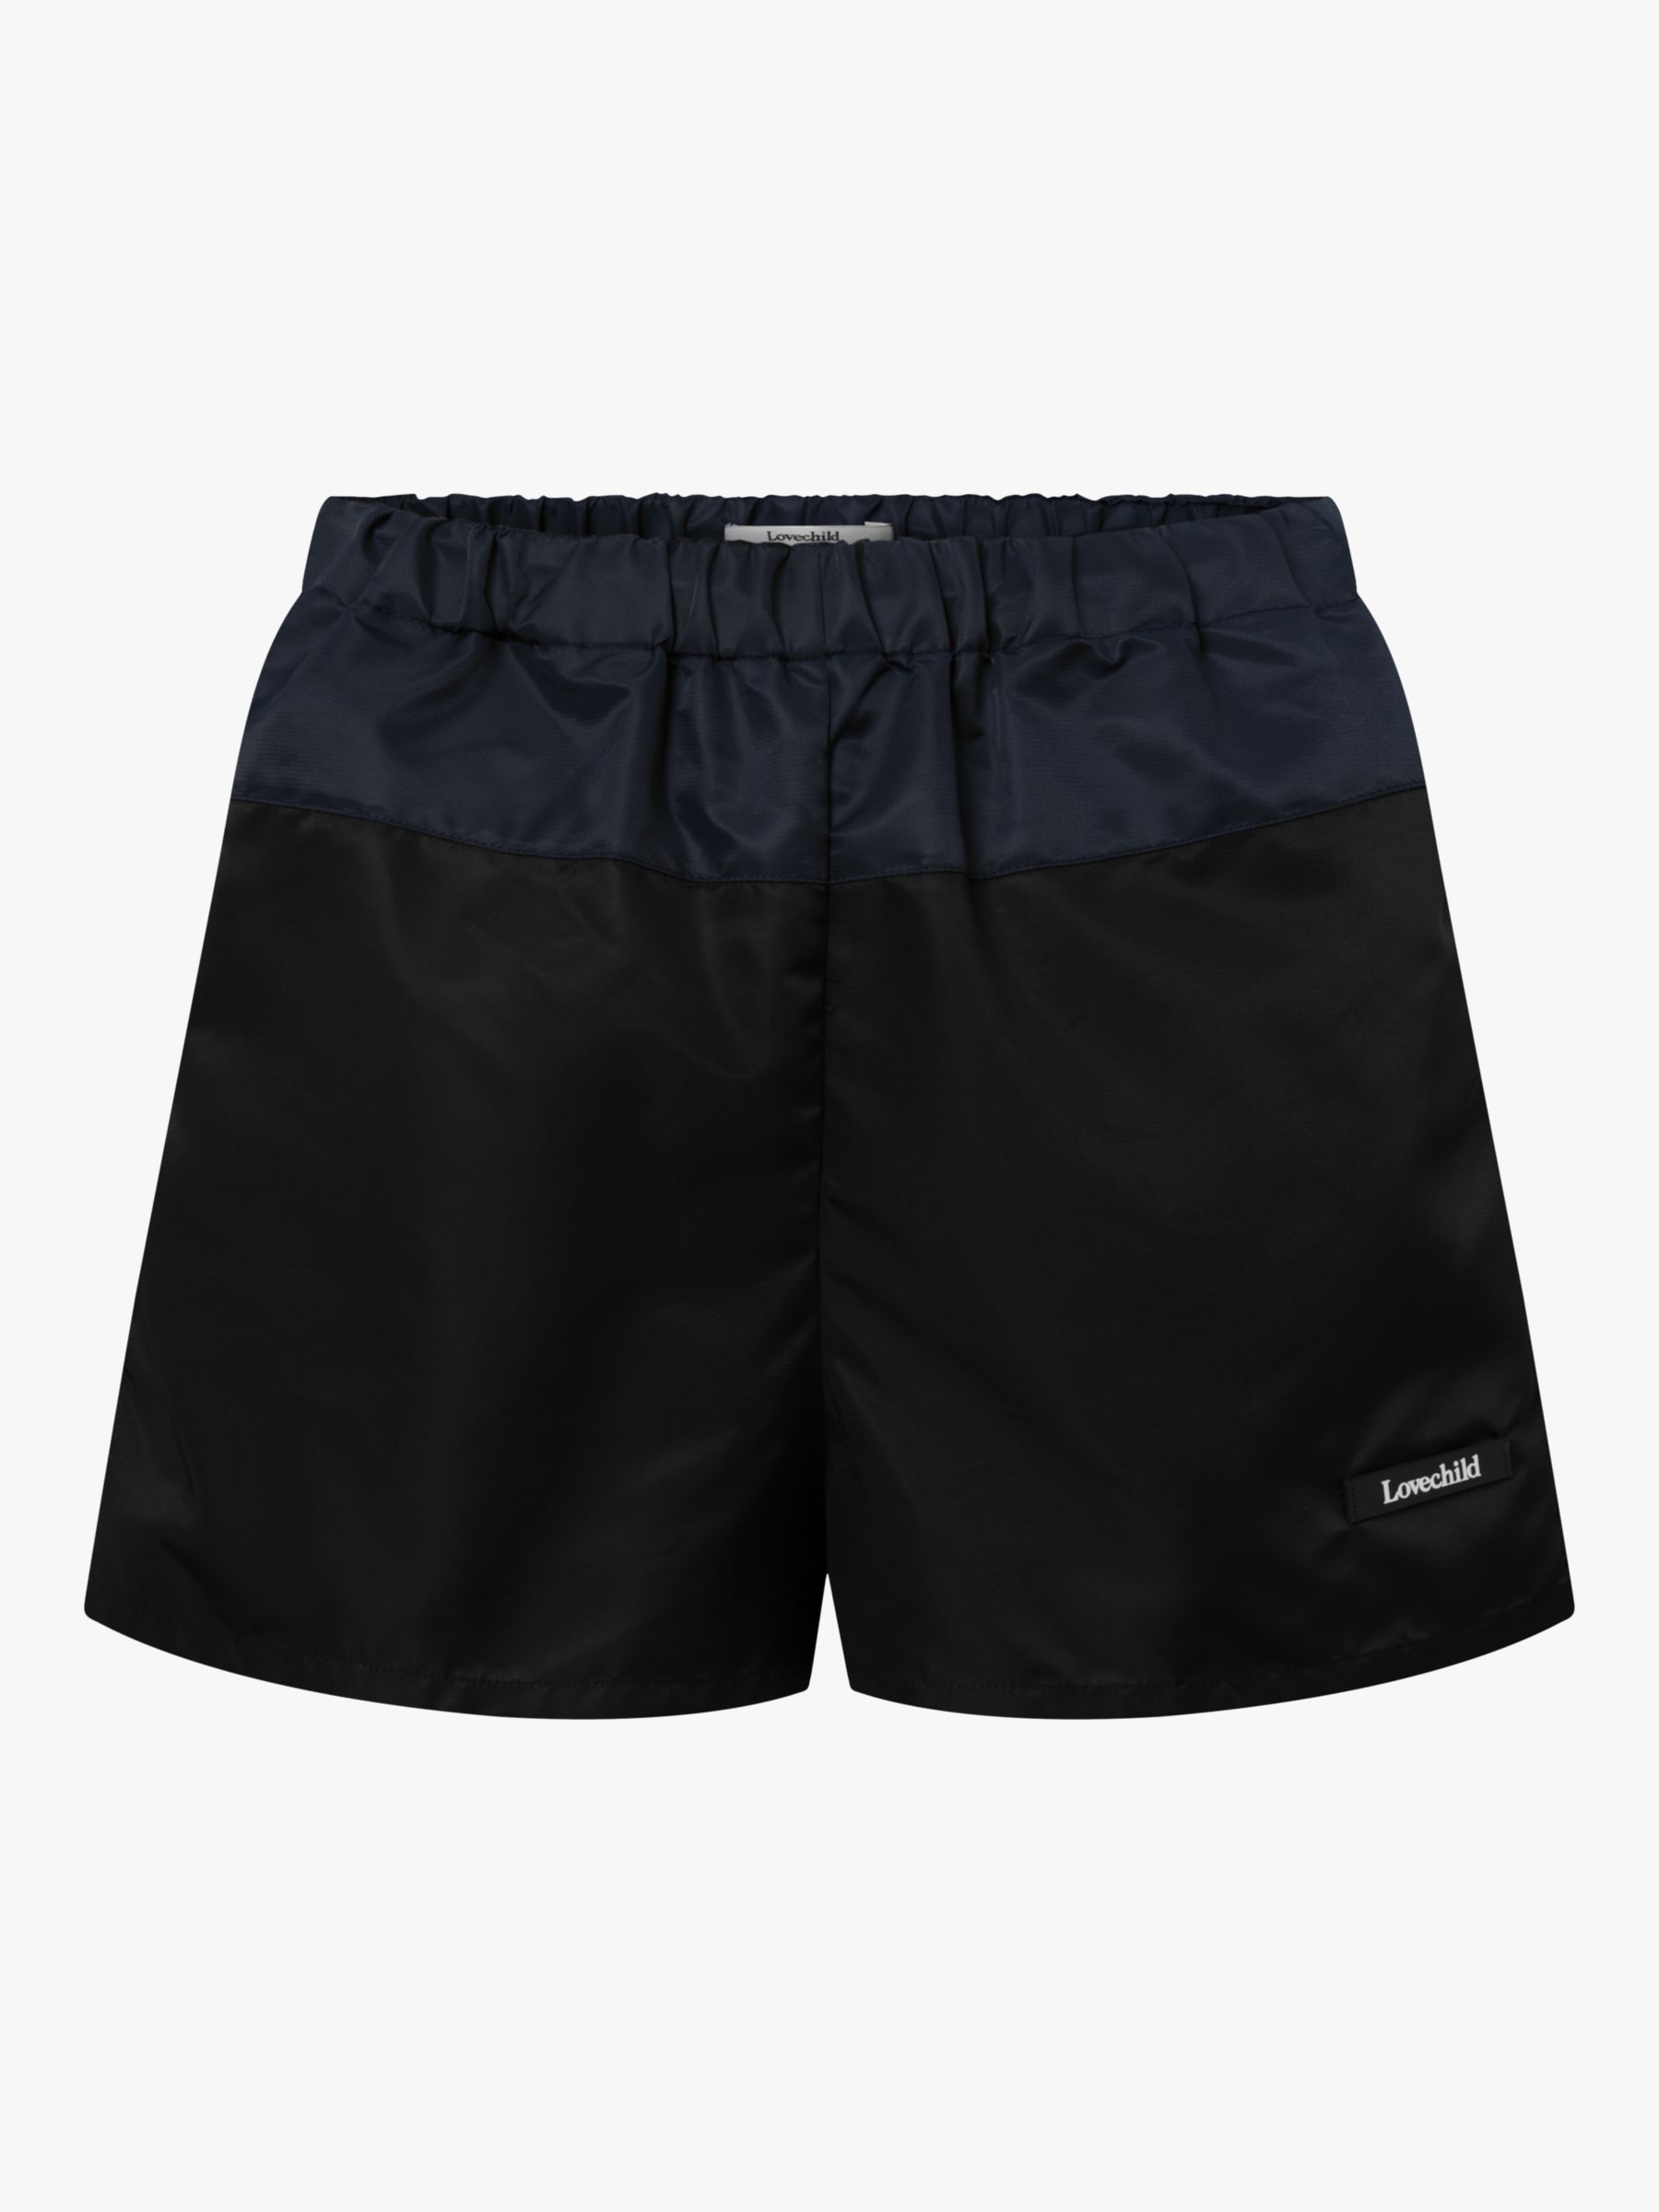 Lovechild 1979 Alessio Two Tone Shorts, Black/Total Eclipse, 10